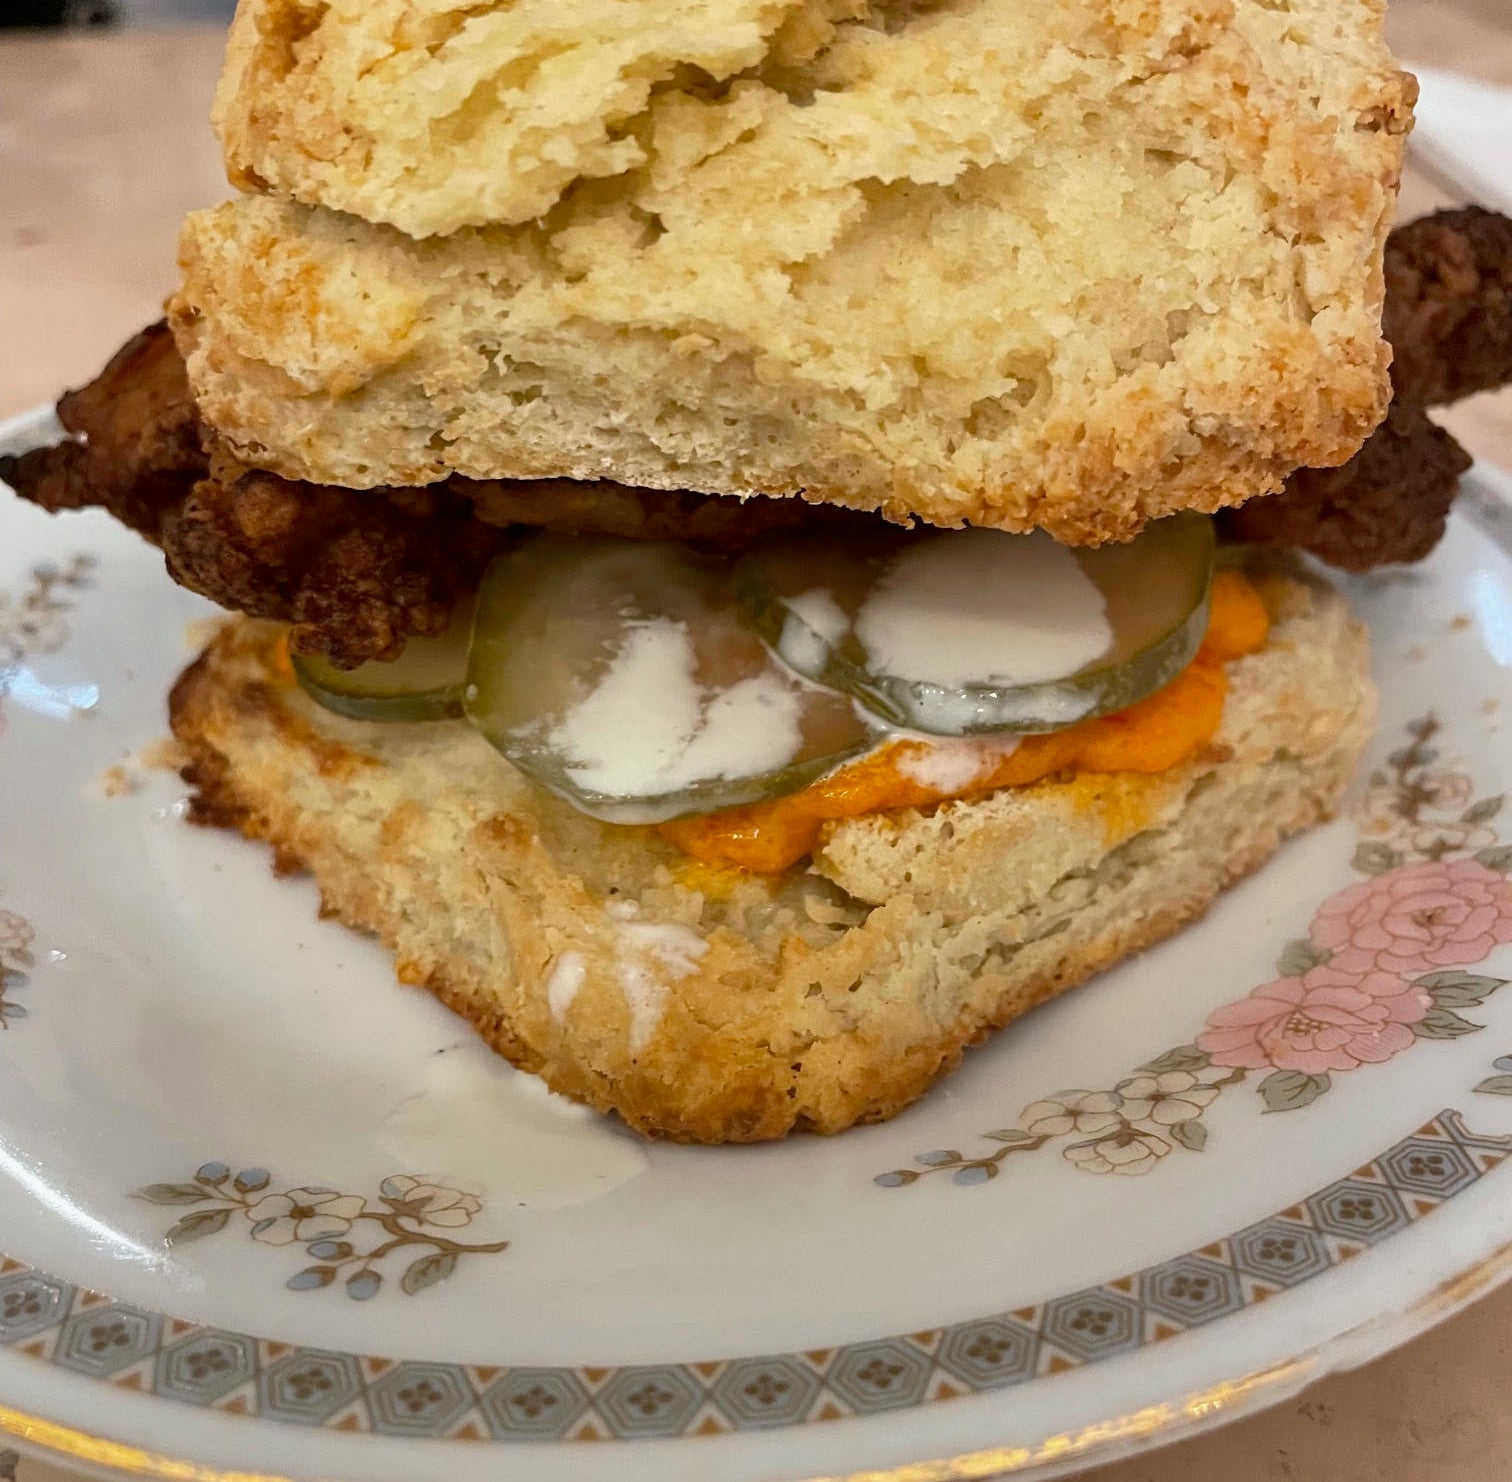 Fried chicken biscuit sandwich with pickles and sauce on a floral plate